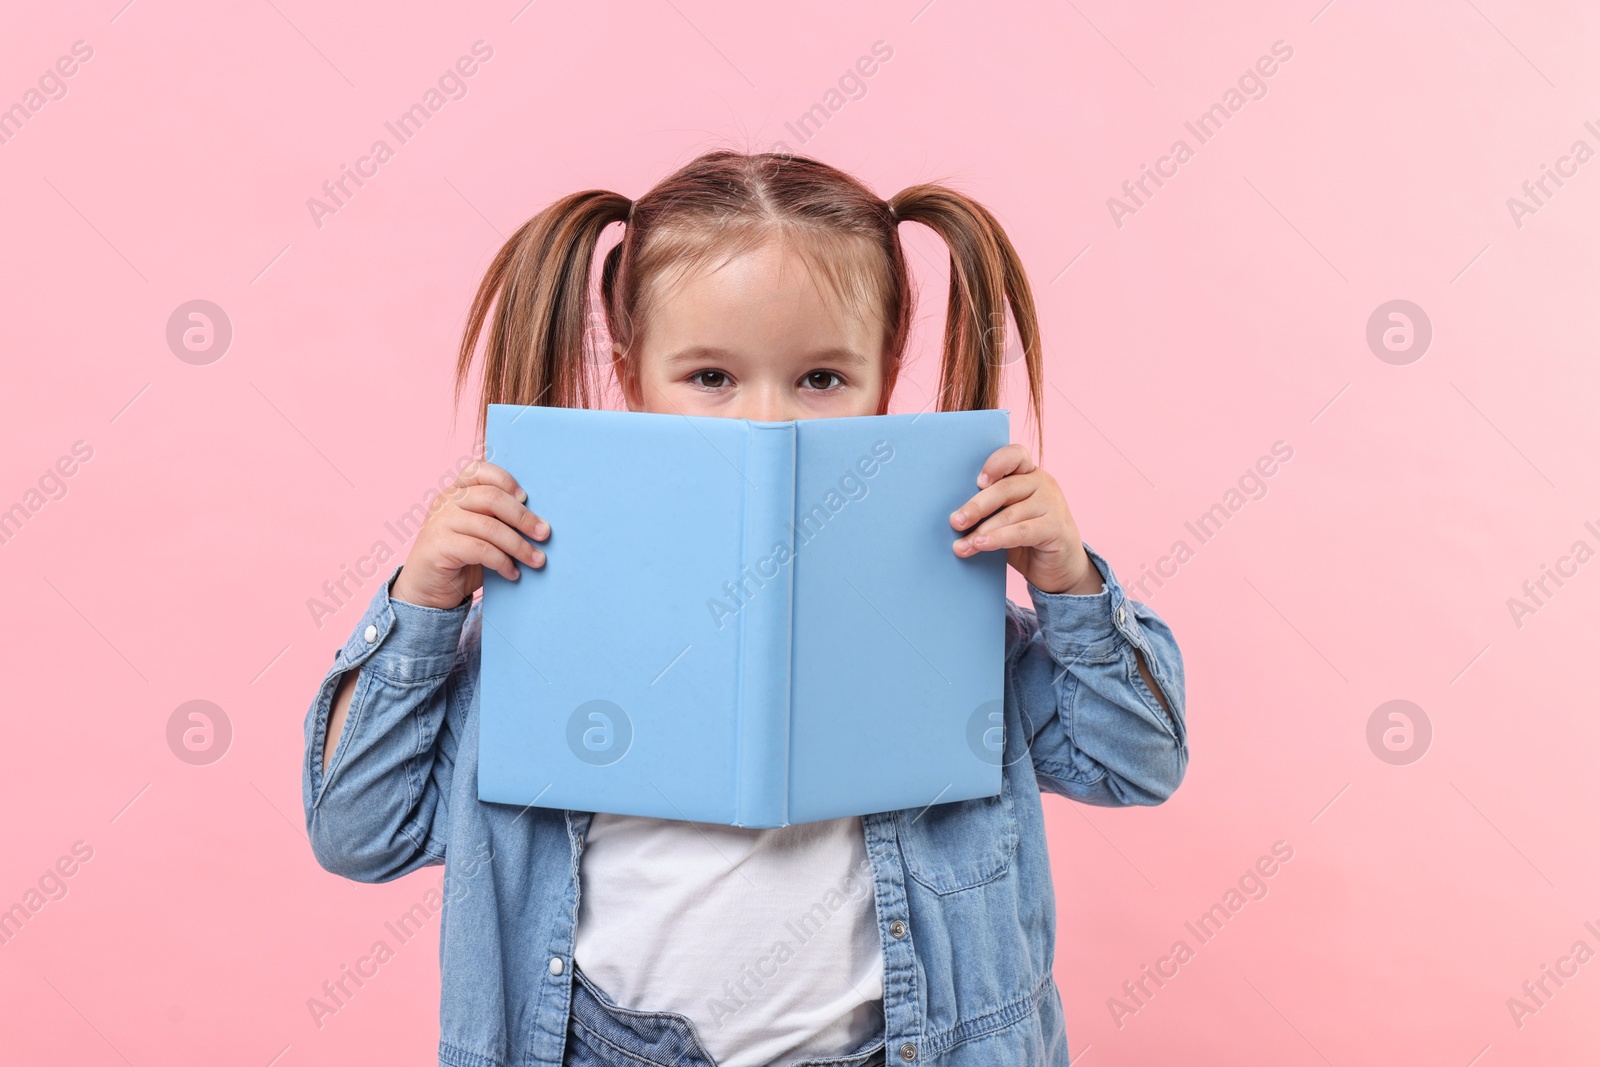 Photo of Cute little girl with open book on pink background